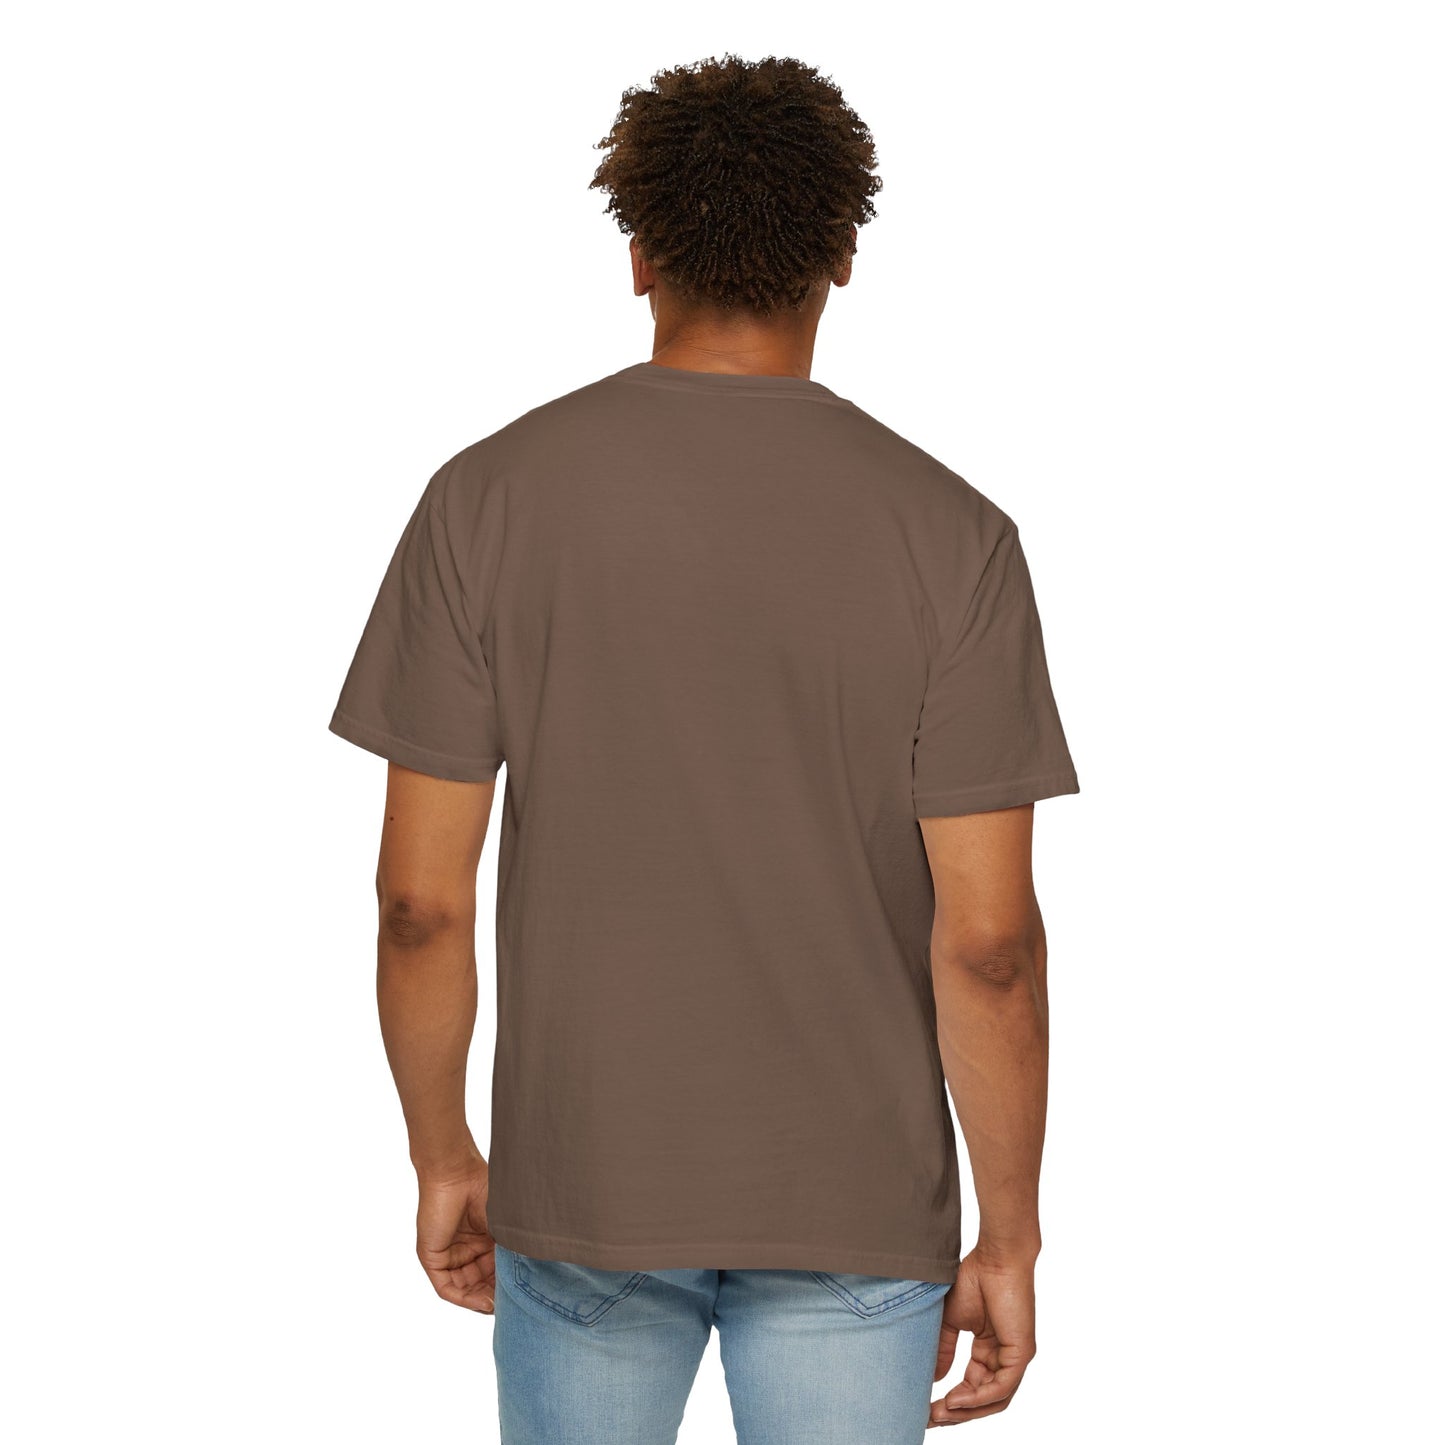 Can't go to work today: Unisex Garment-Dyed T-shirt